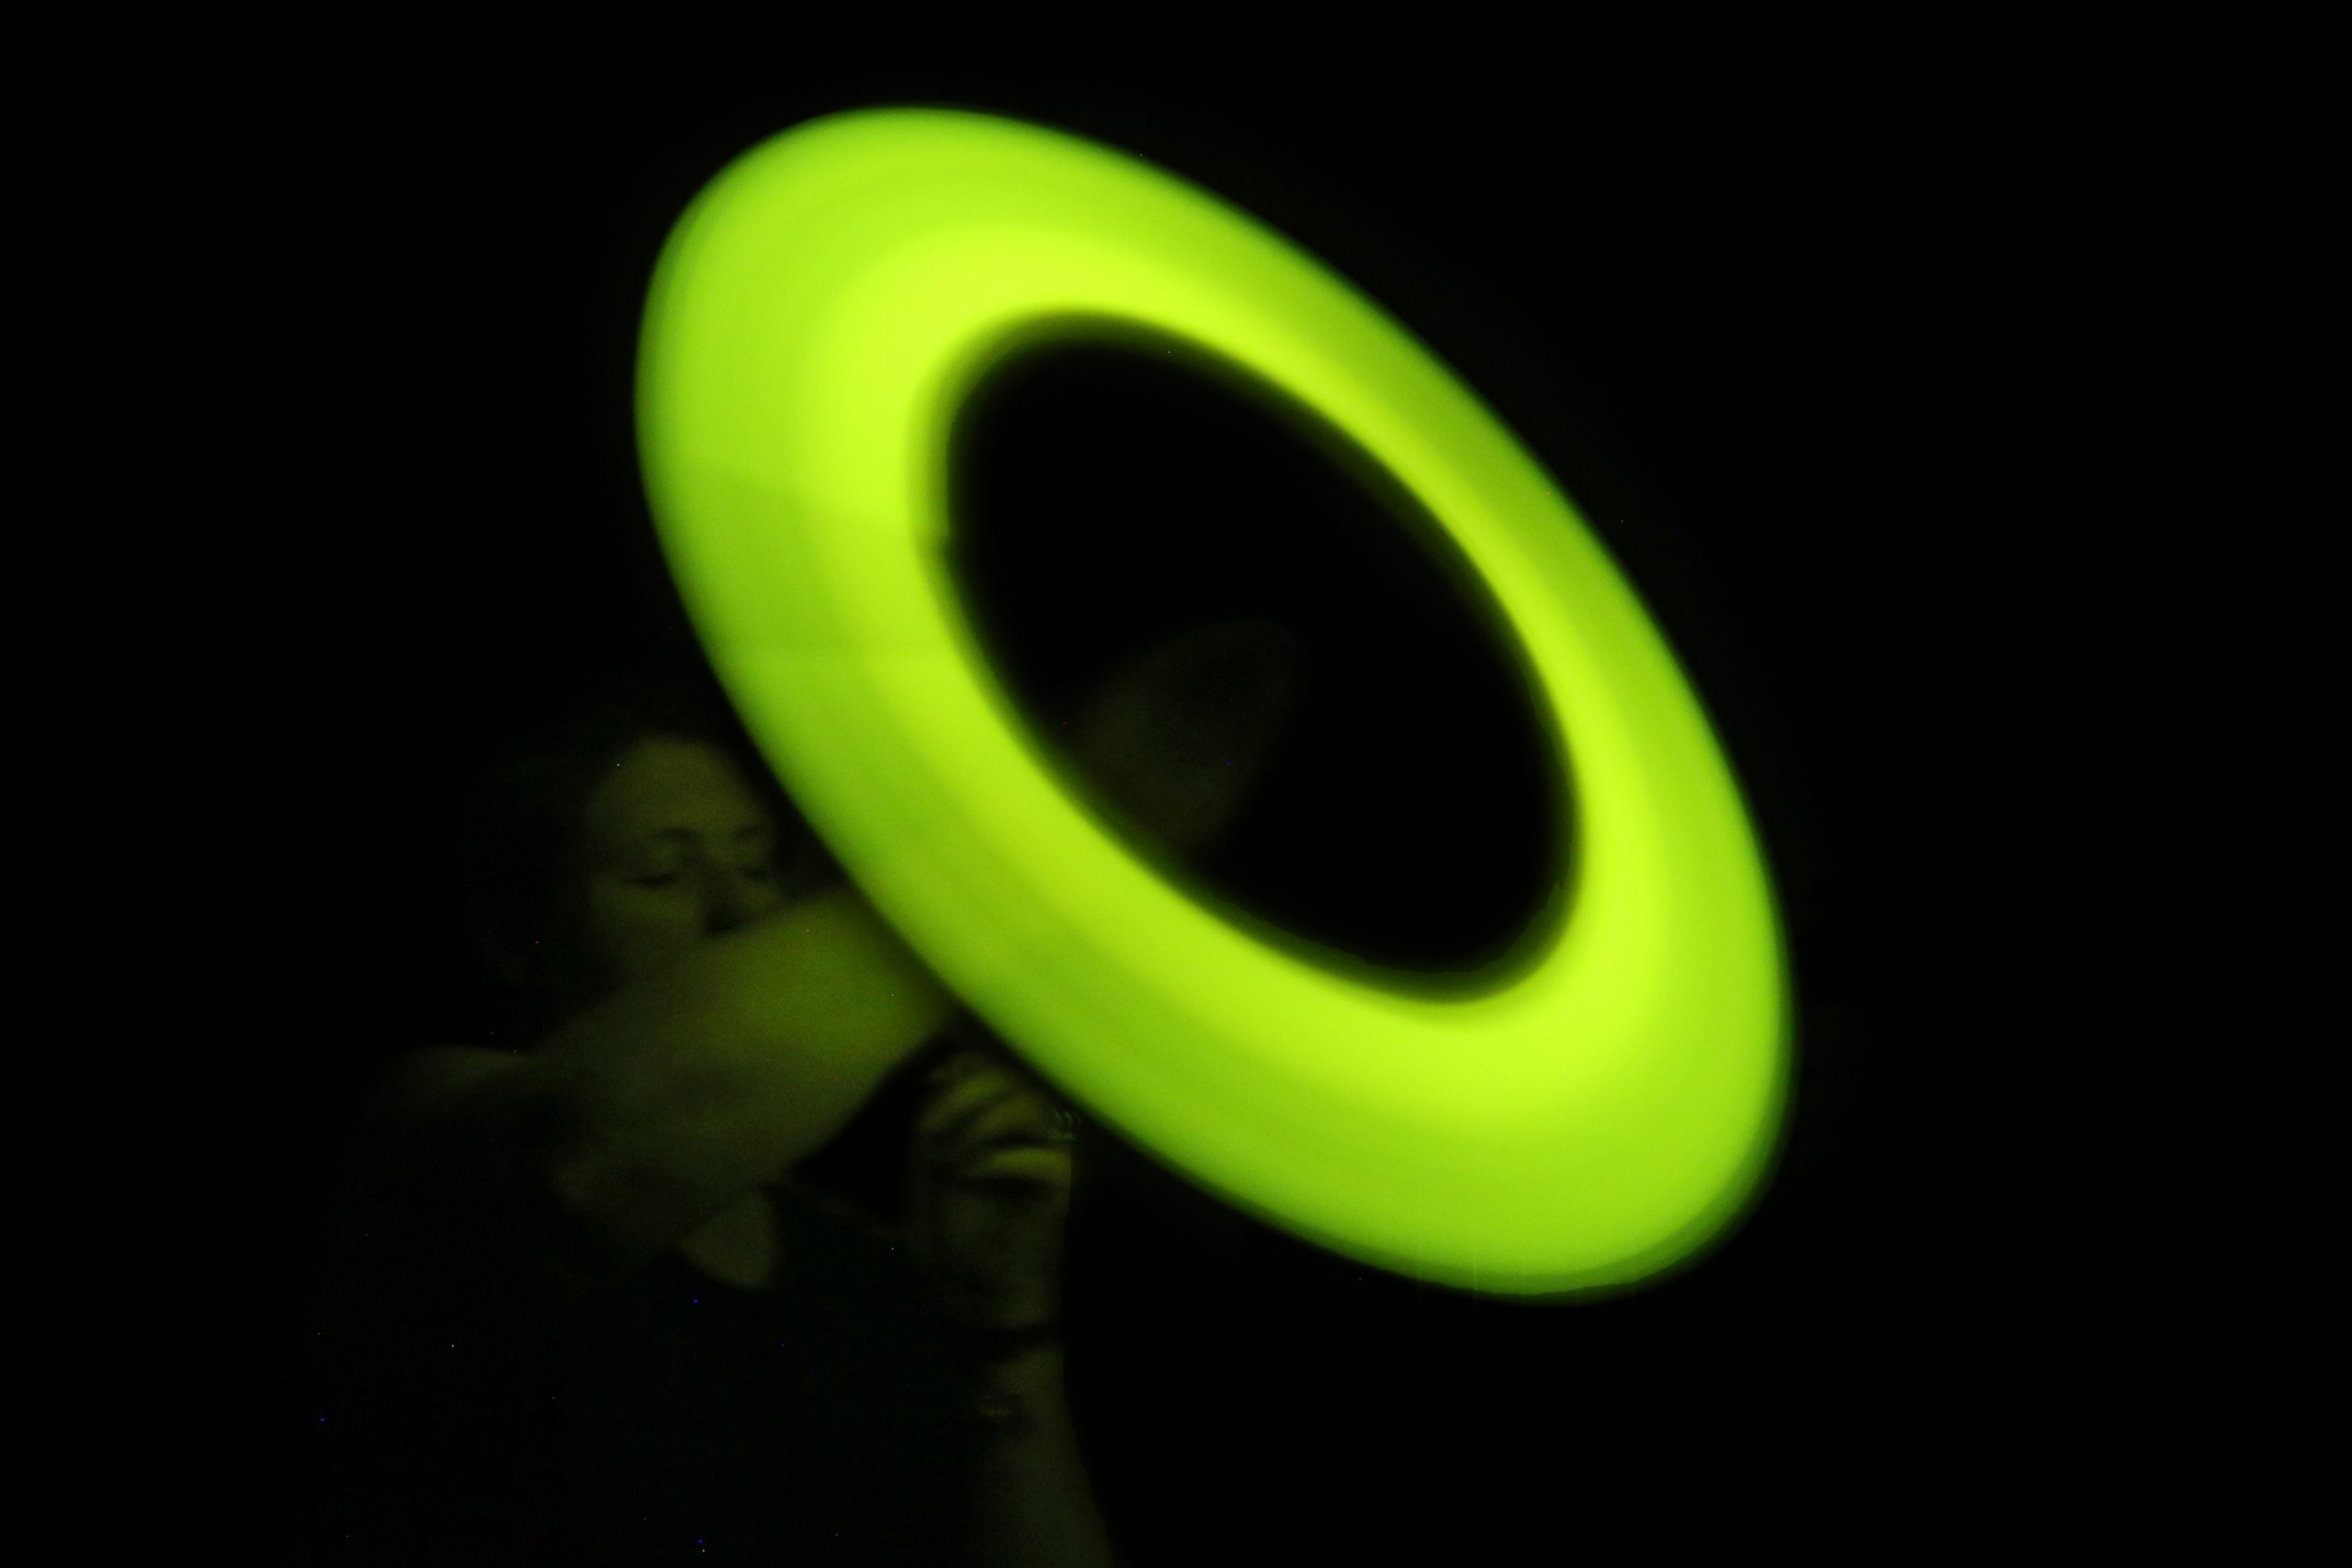 A glowing light stick being swung in a circle on a string creating the illusion of a large, glowing circle.